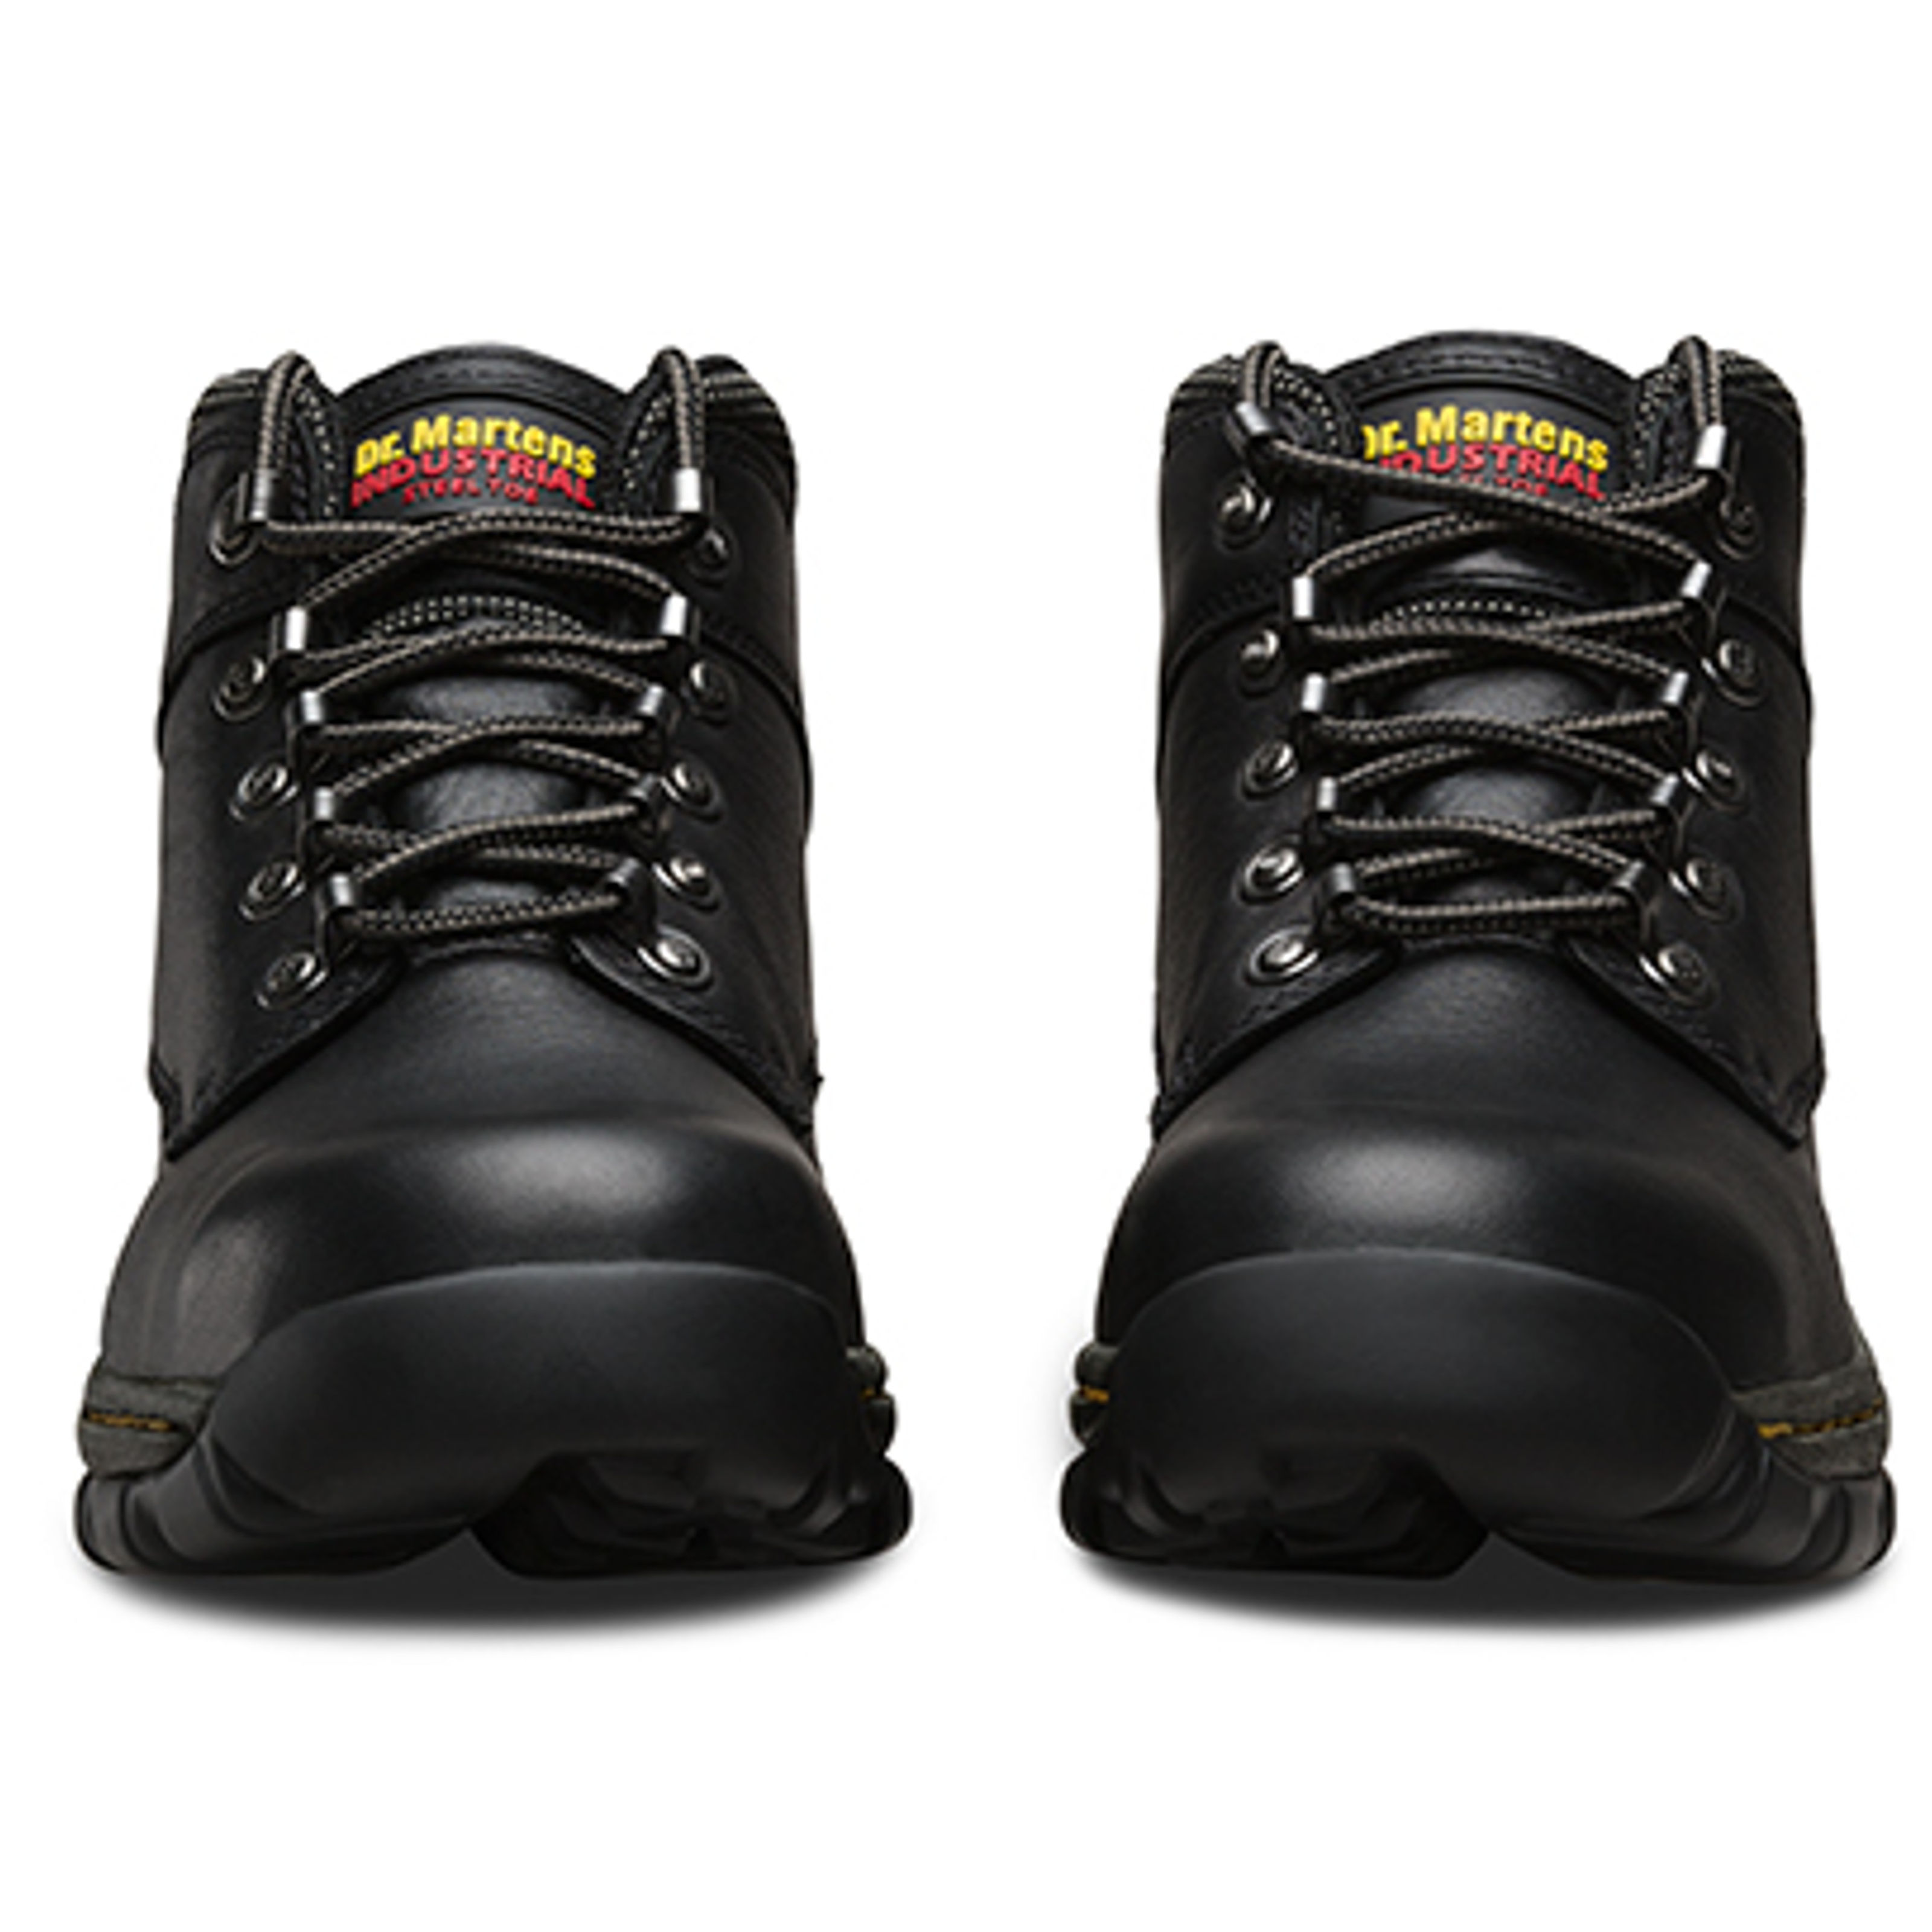 Dr Martens 7A52 Tred Black Steel Toe Cap Hiker Style Boots